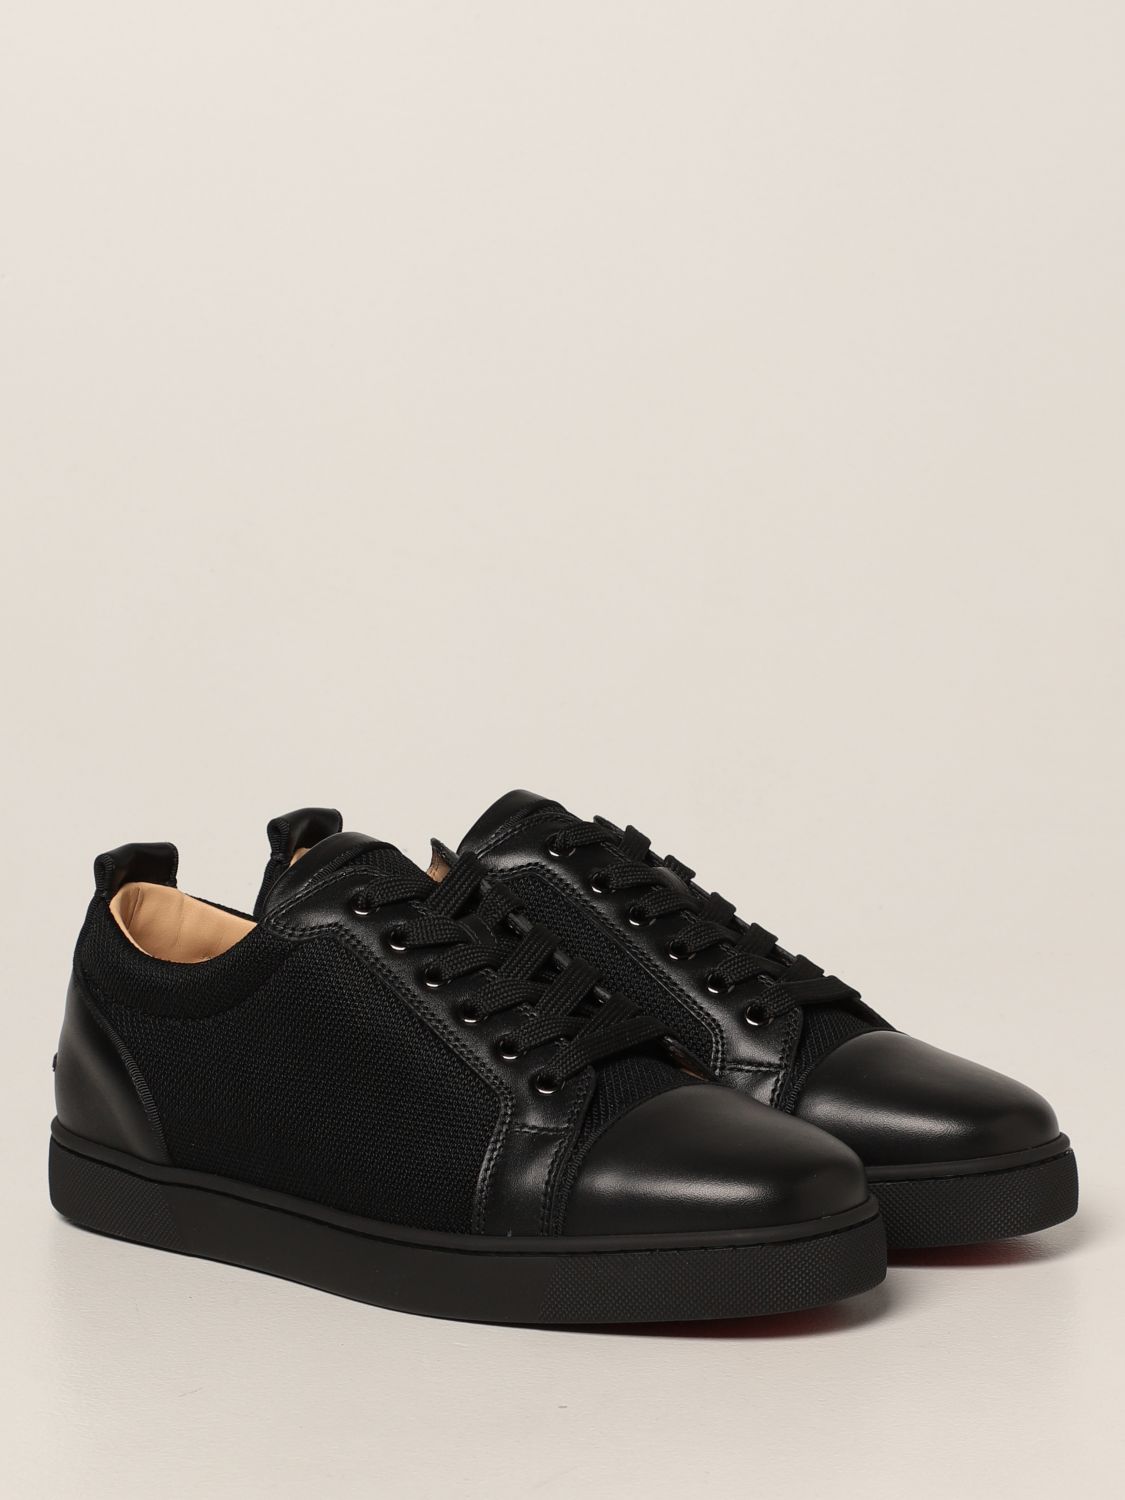 CHRISTIAN LOUBOUTIN: Louis Junior Orlato sneakers in leather and fabric | Sneakers Louboutin Men Black Sneakers Christian Louboutin GIGLIO.COM